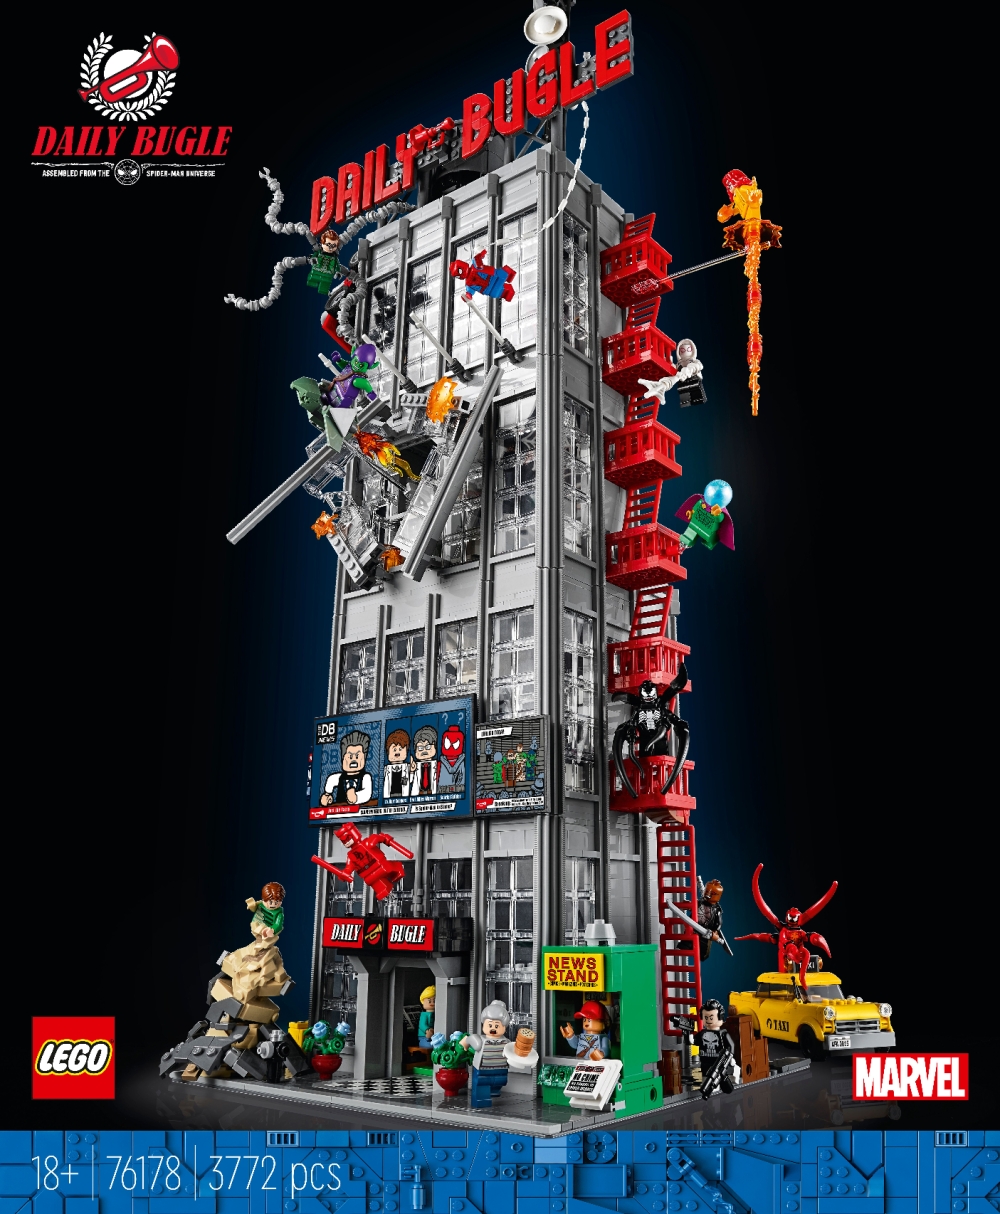 LEGO 76178 DAILY BUGLE, 5702016912807, 1000040553, (Ingen), Hard to find, 76178, LE-76178